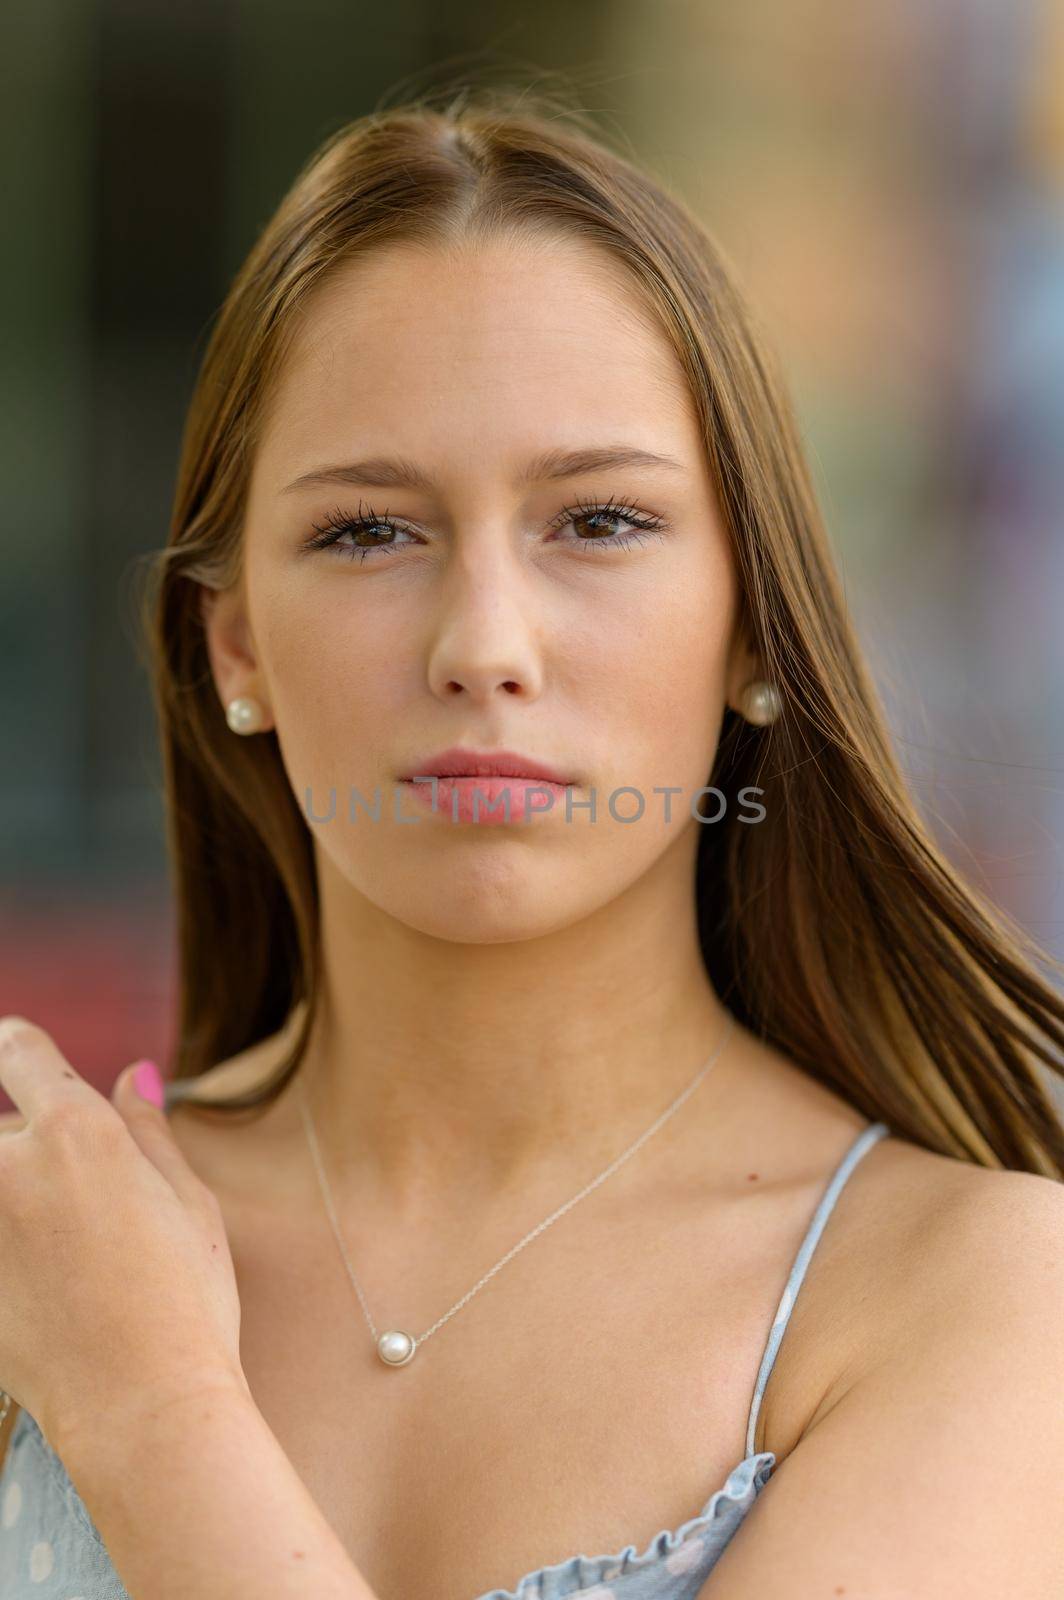 A portrait of a pretty young woman taken in the summertime in a city with a blurred background.